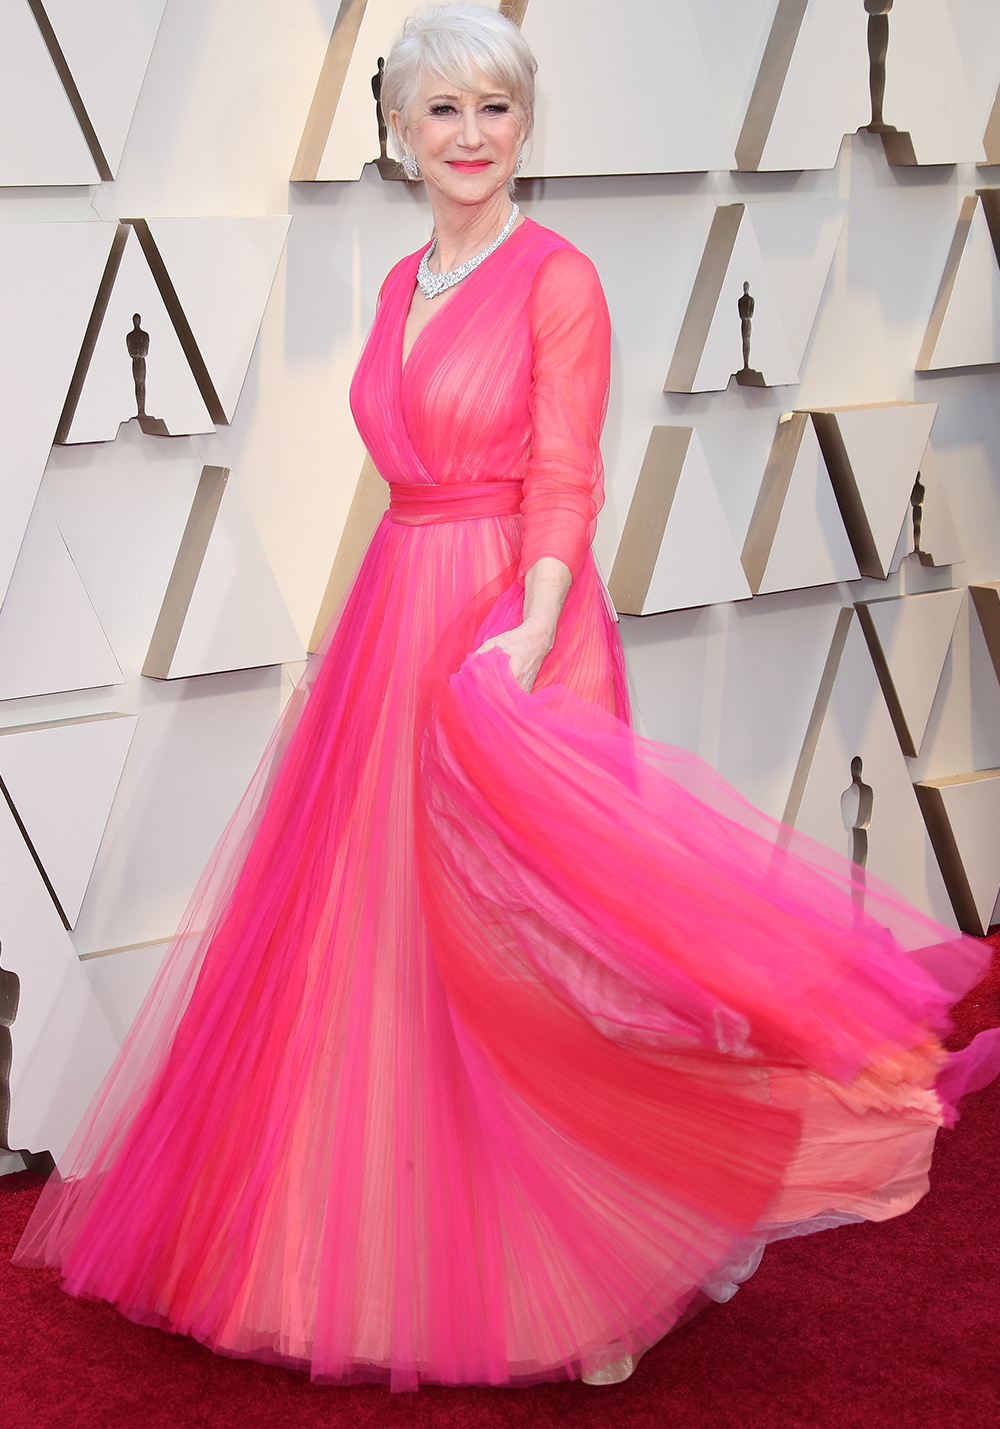 over 50 fashion and clothing inspiration: Helen Mirren in a pink tulle gown